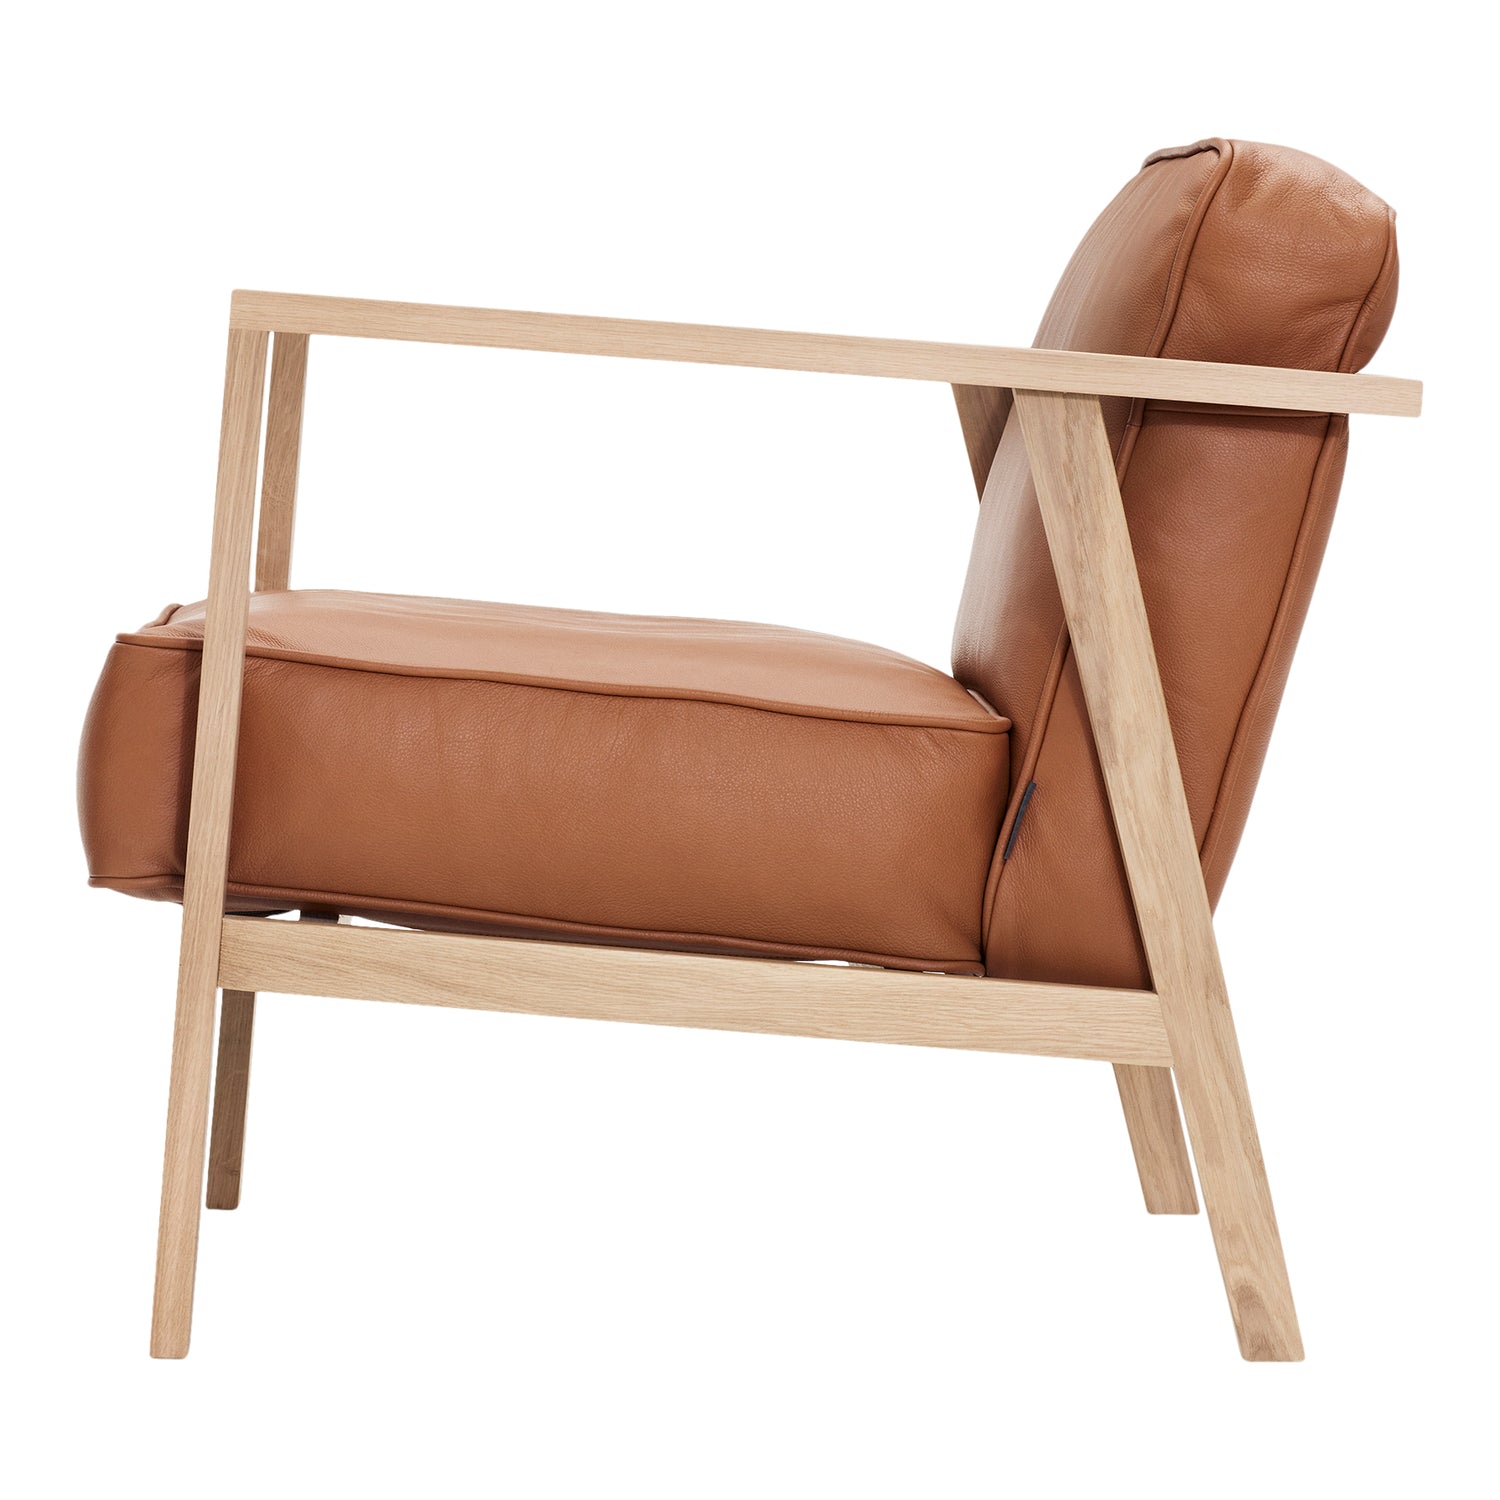 Andersen Furniture - LC1 Lounge chair - cognac leather/frame in oak